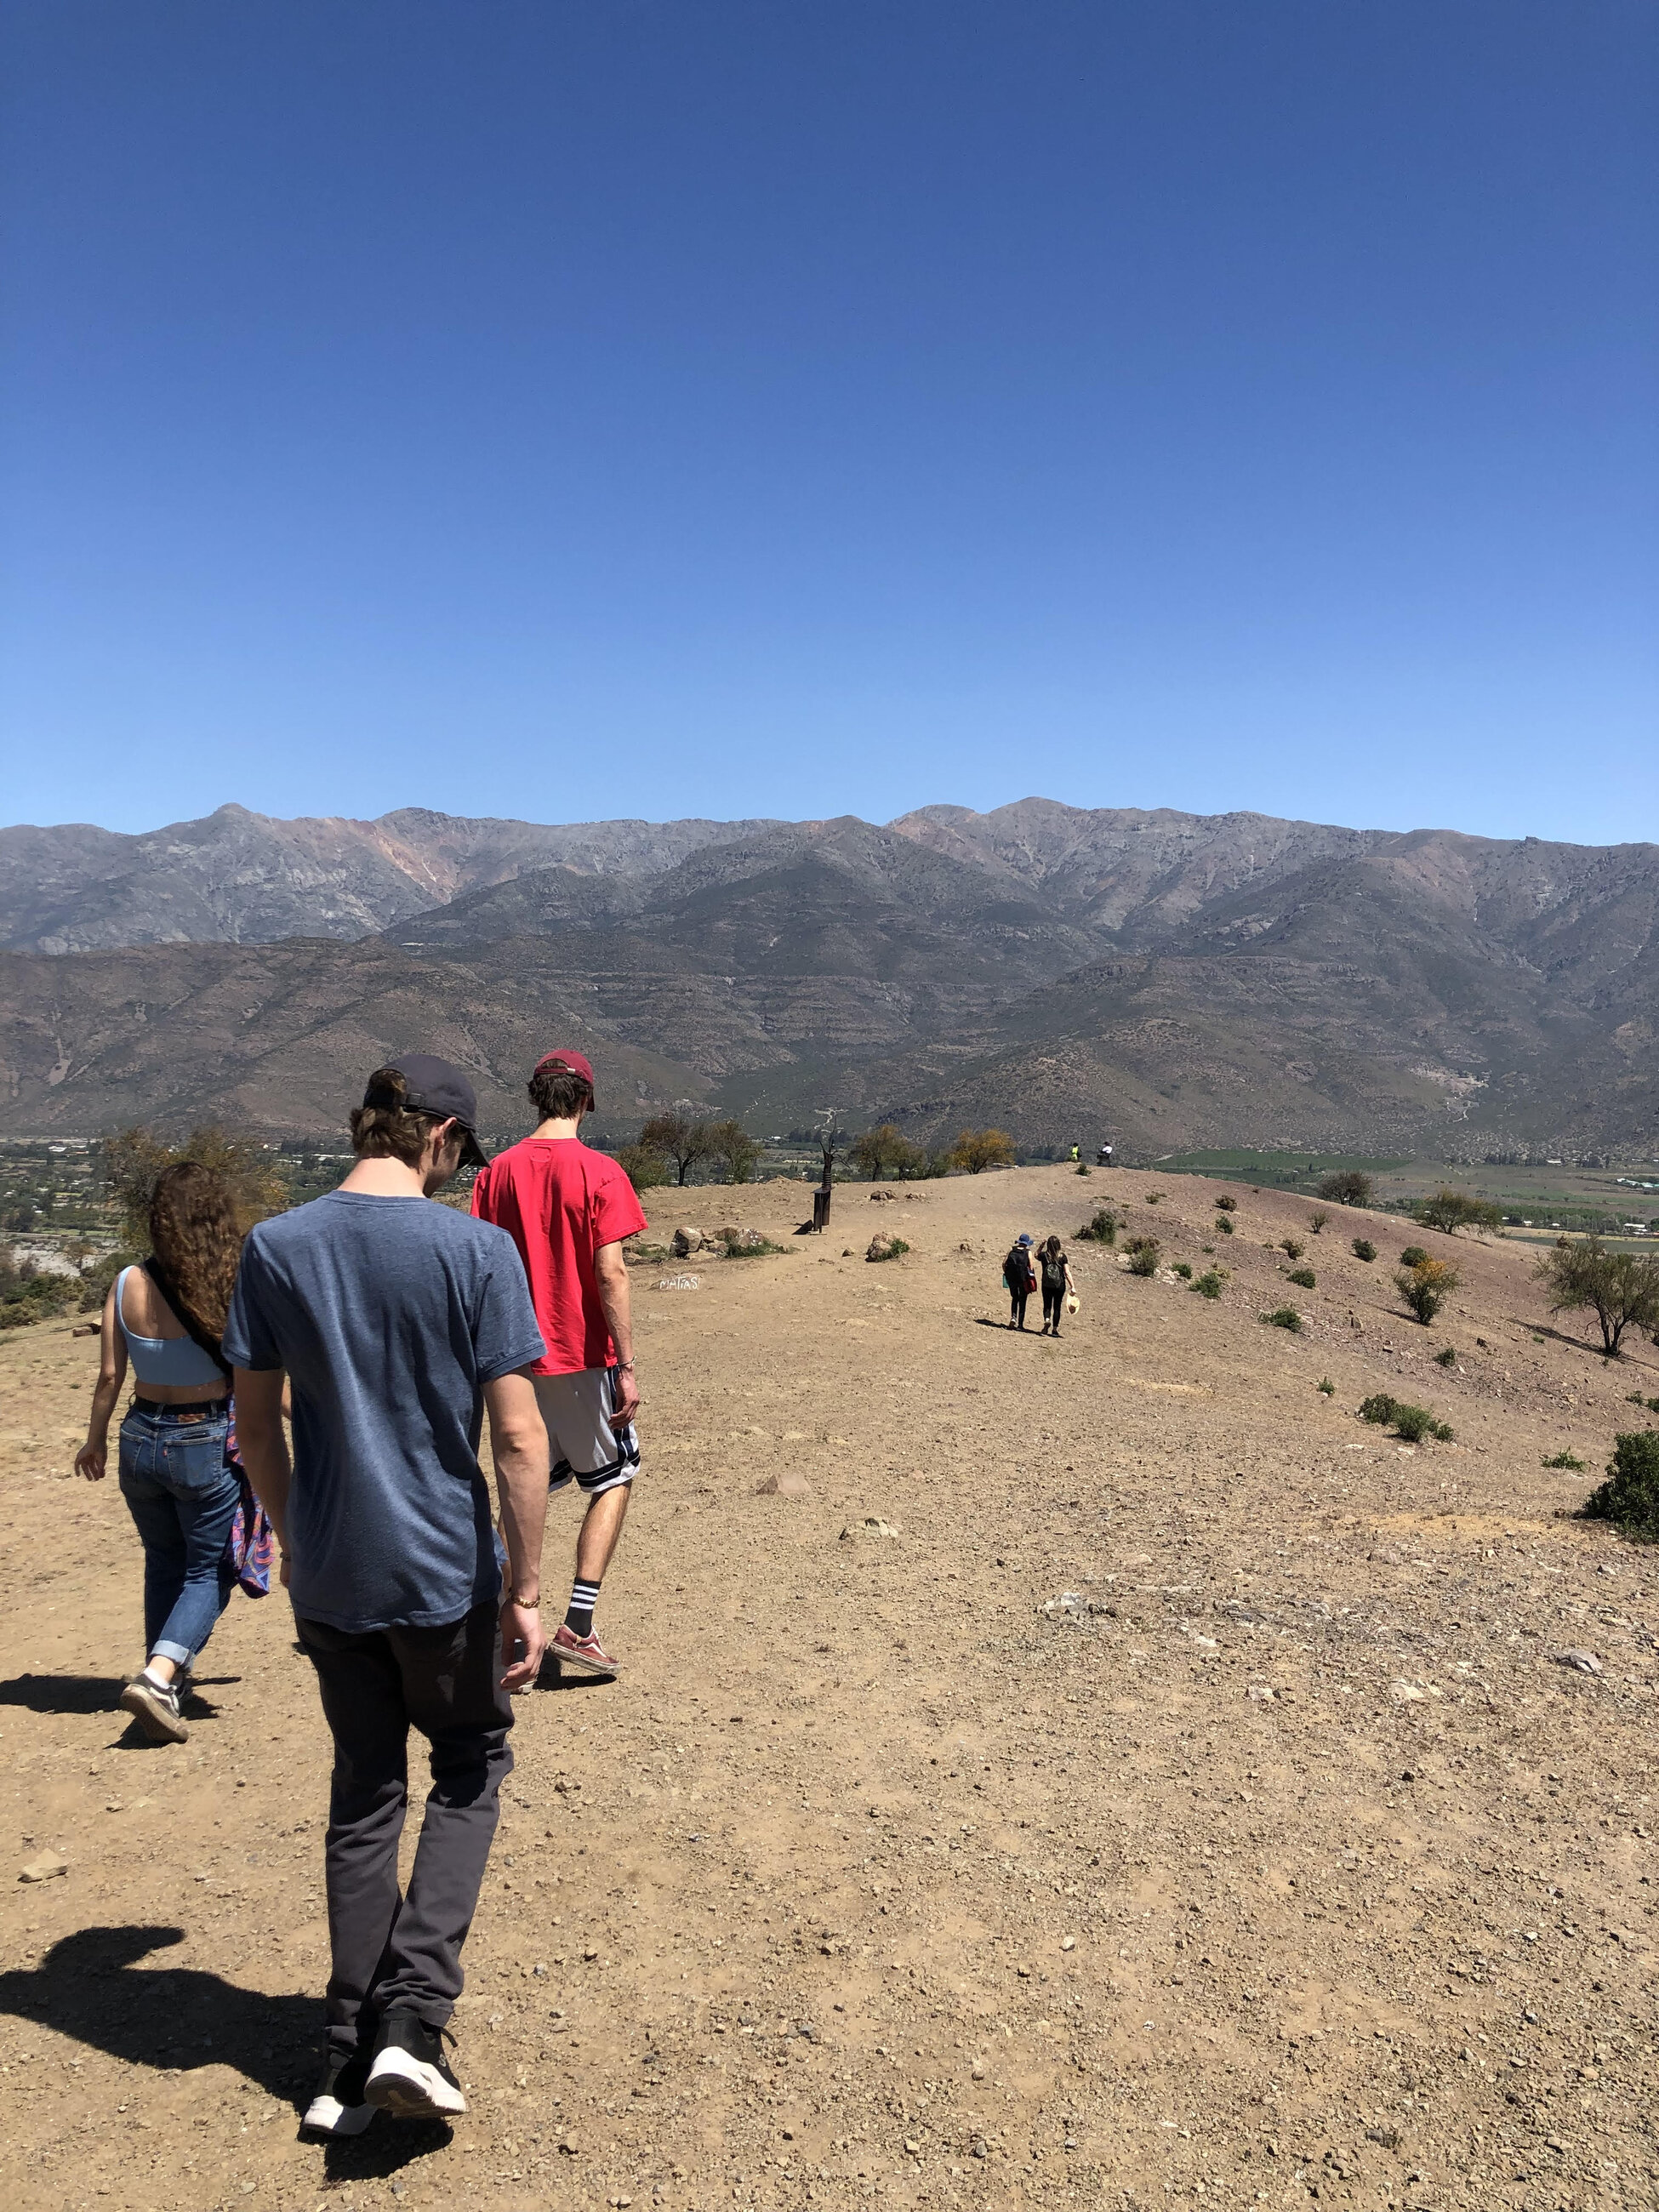 My group visiting the Valle de Aconcagua area!